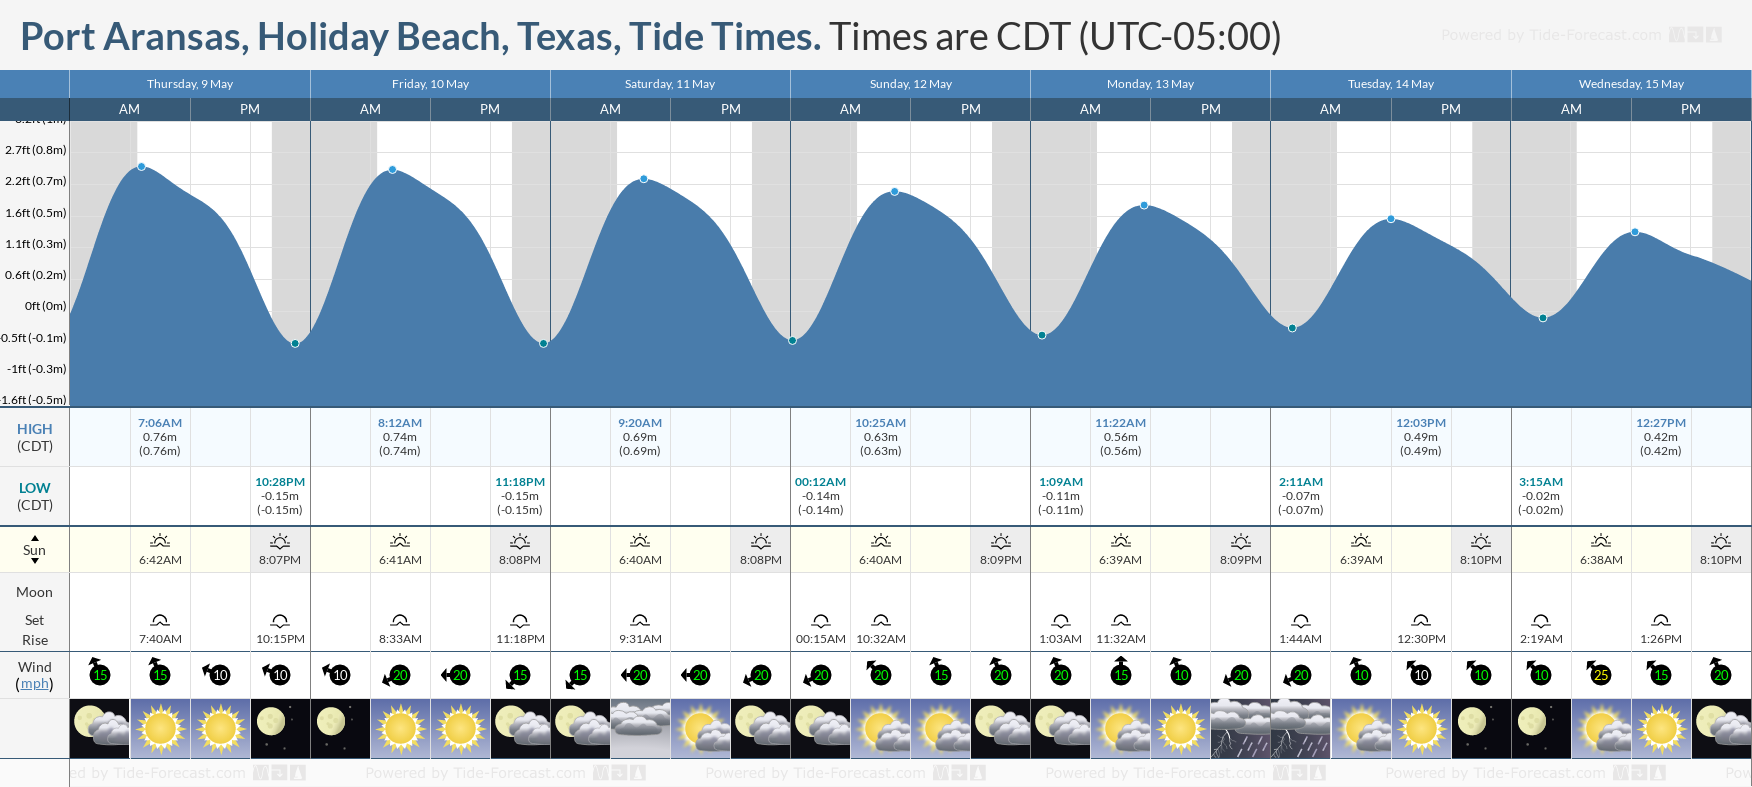 Port Aransas, Holiday Beach, Texas Tide Chart including high and low tide tide times for the next 7 days